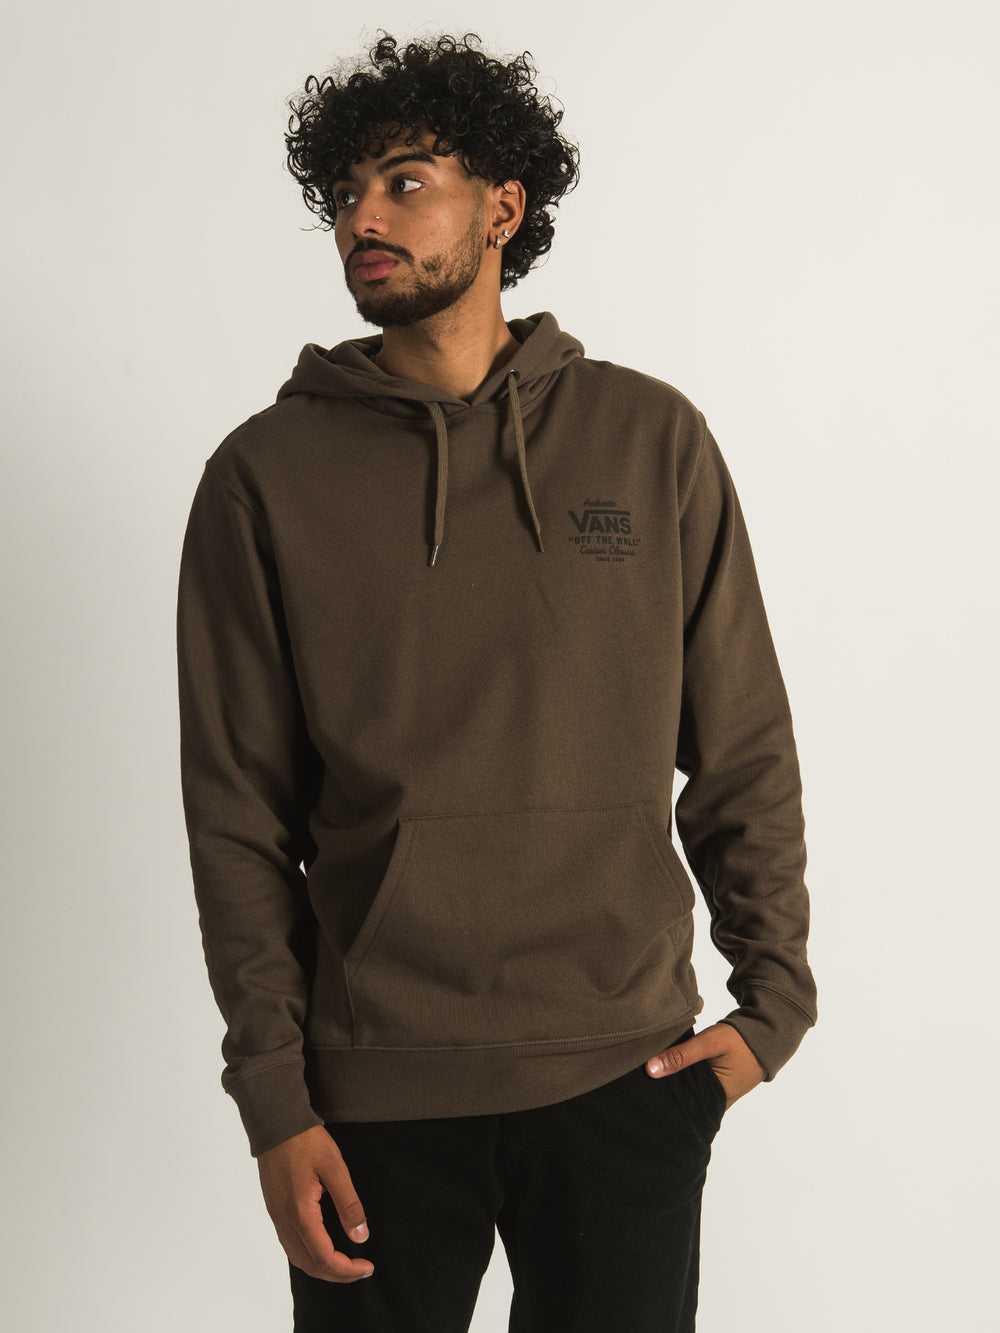 VANS HOLDER ST CLASSIC PULLOVER - CLEARANCE